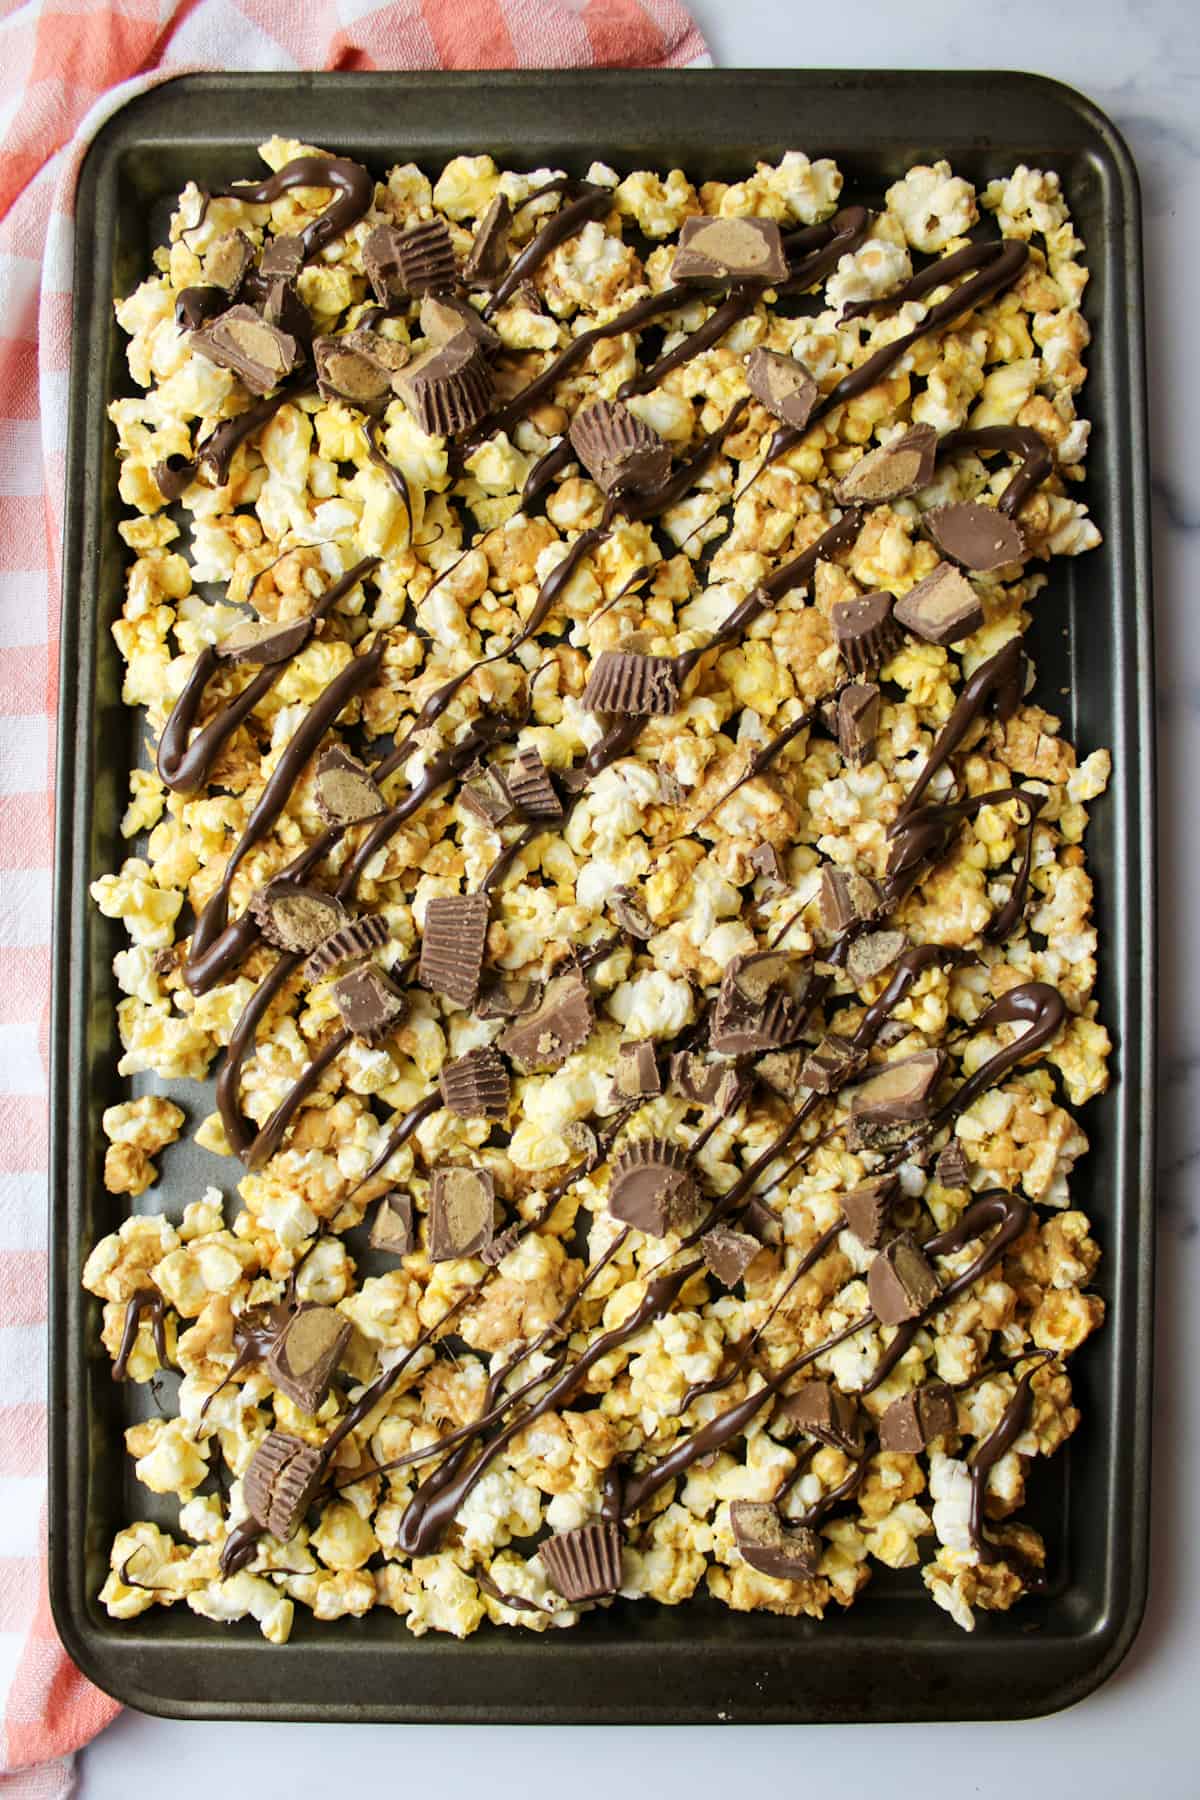 chocolate drizzled over peanut butter coated popcorn on a baking sheet and topped with chunks of peanut butter cups.